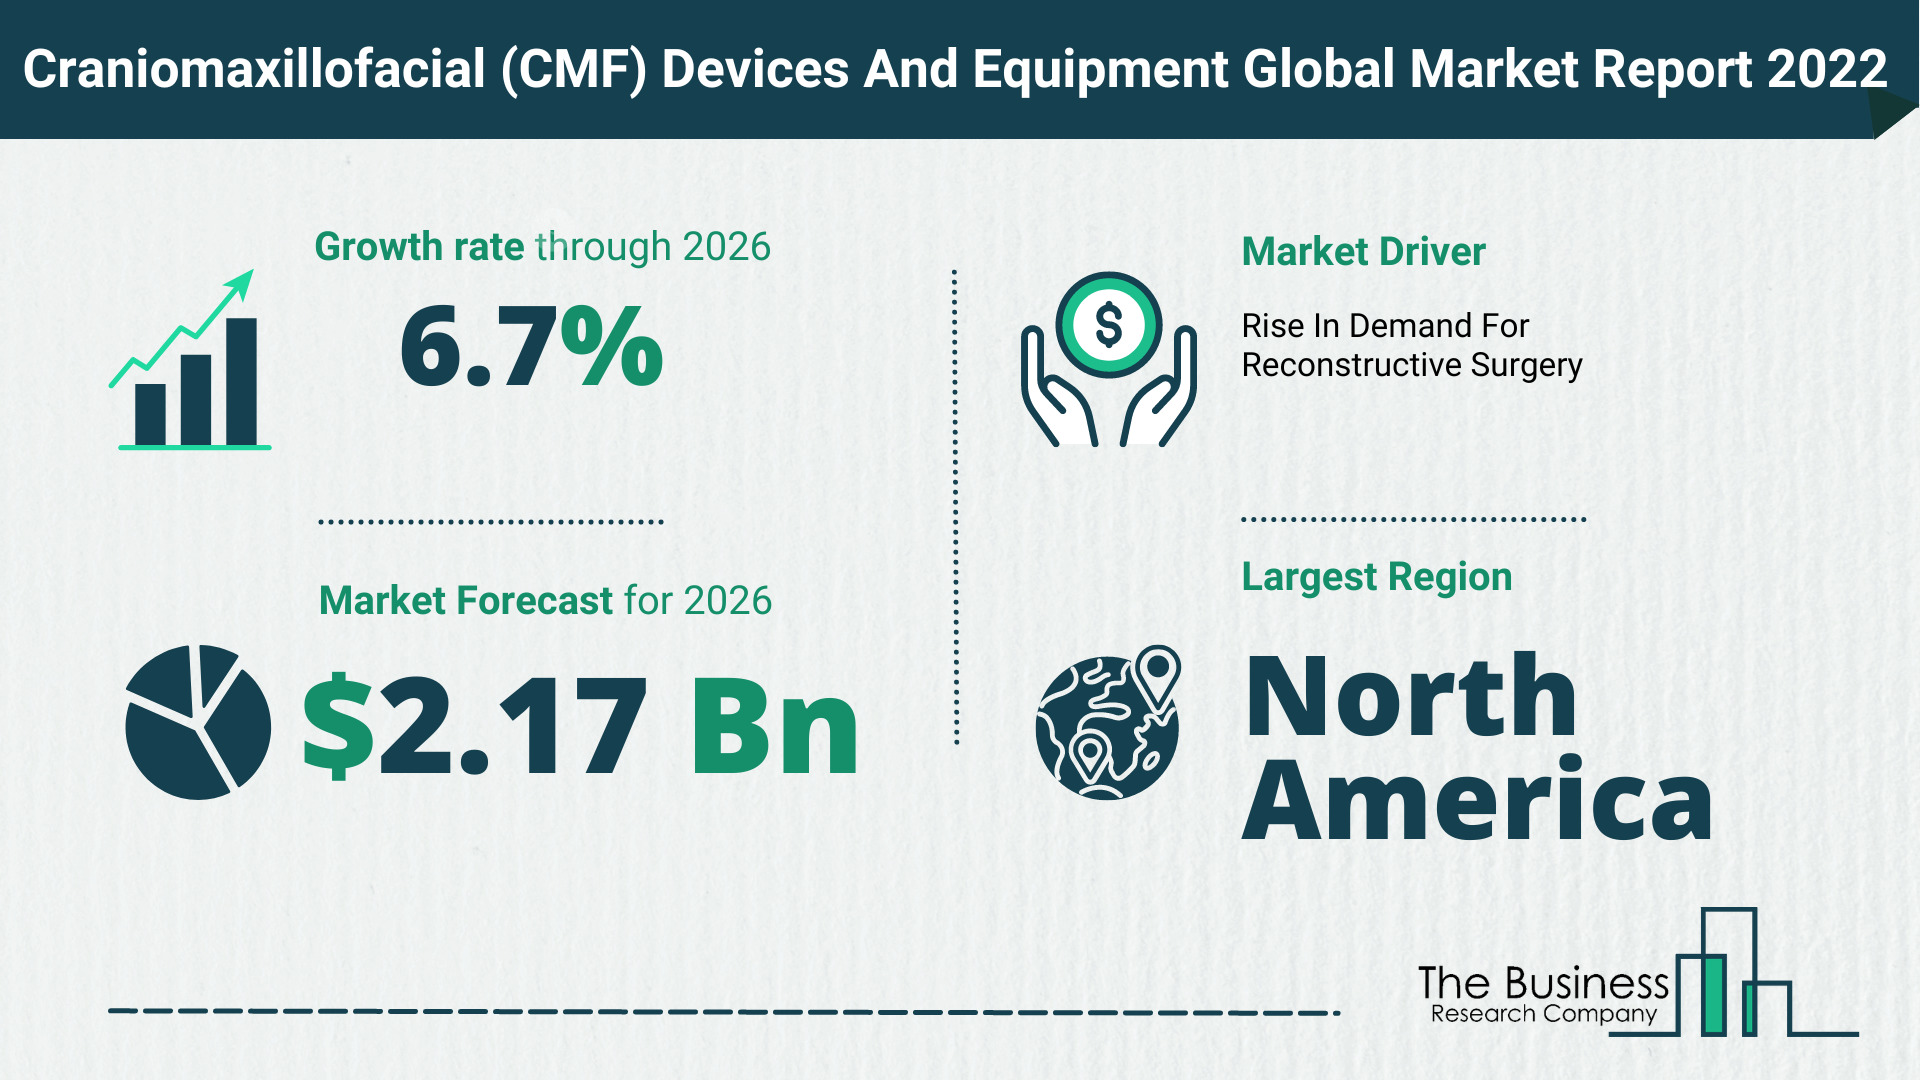 The Craniomaxillofacial (CMF) Devices And Equipment Market Share, Market Size, And Growth Rate 2022